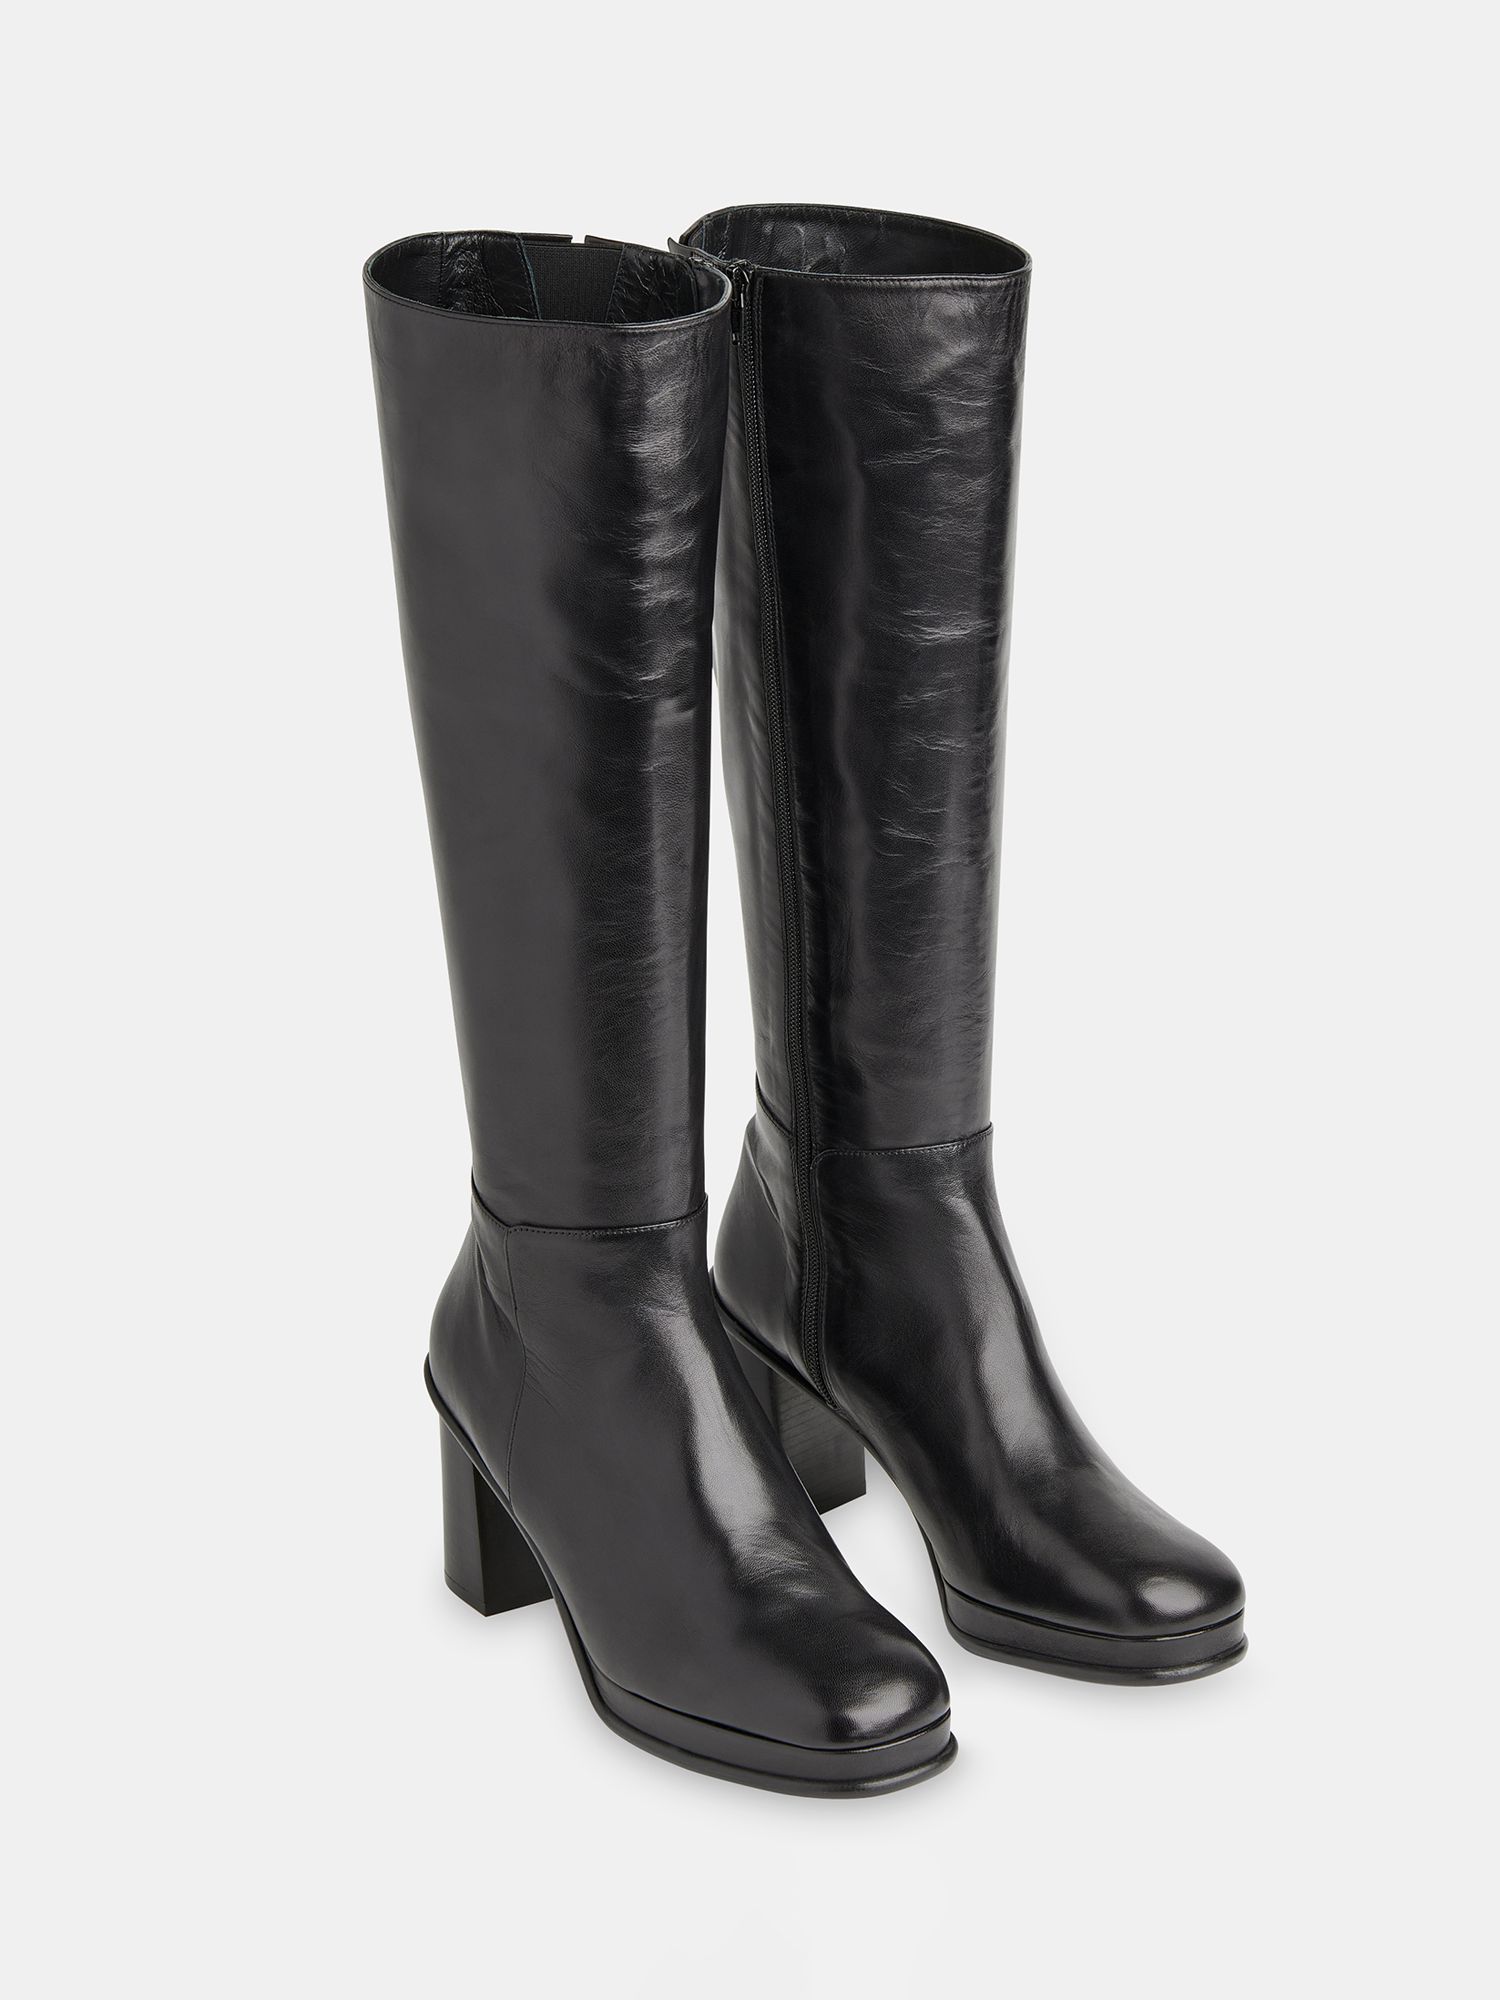 Whistles Clara Leather Knee High Boots, Black, 3